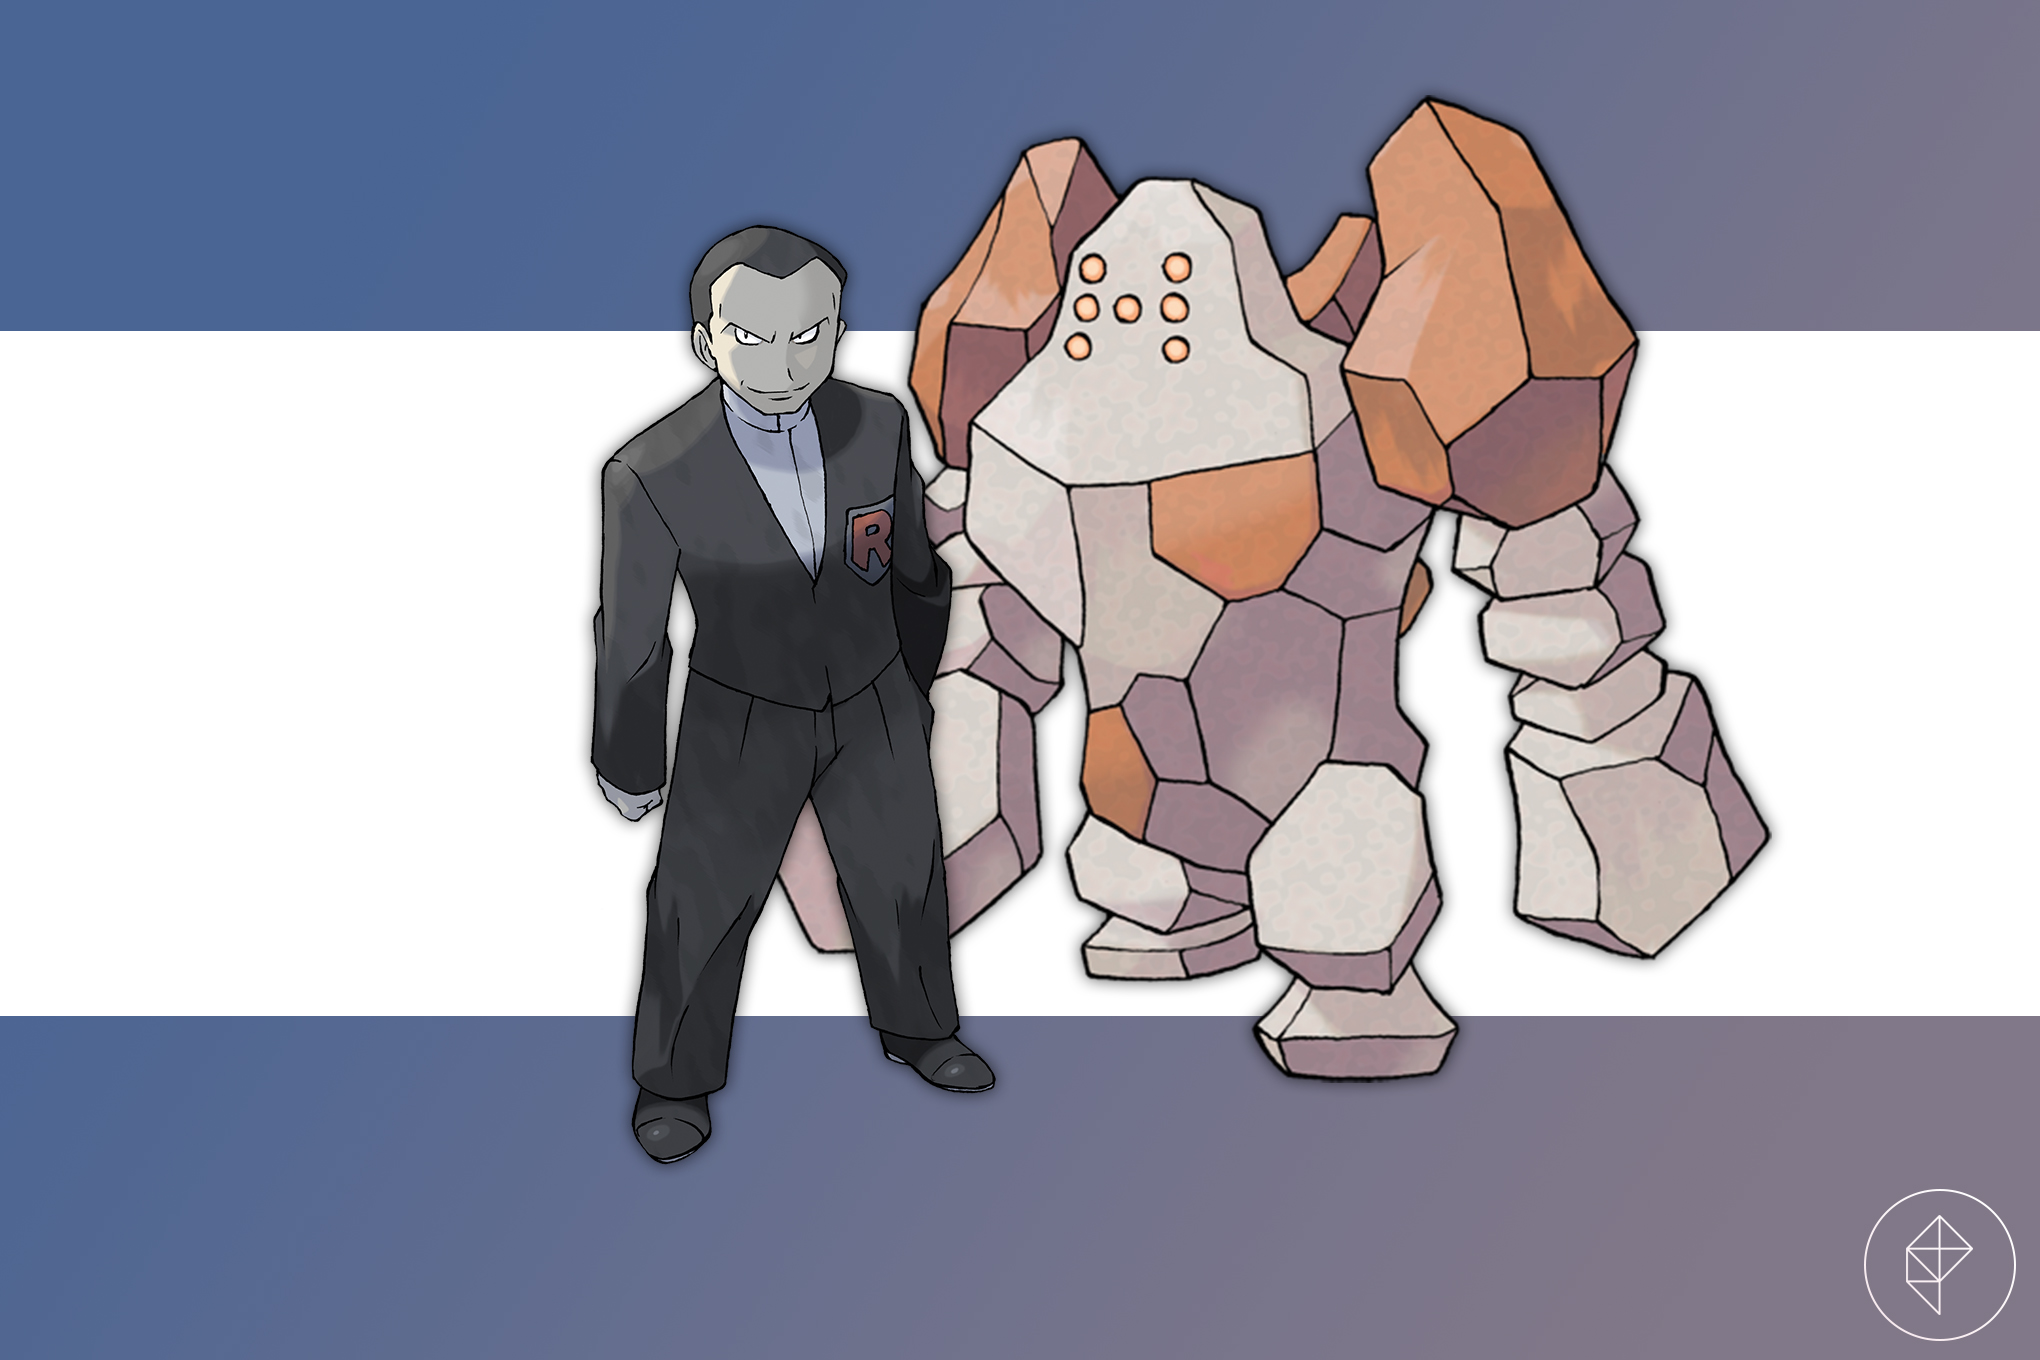 Giovanni and Regirock on a purple and blue gradient background